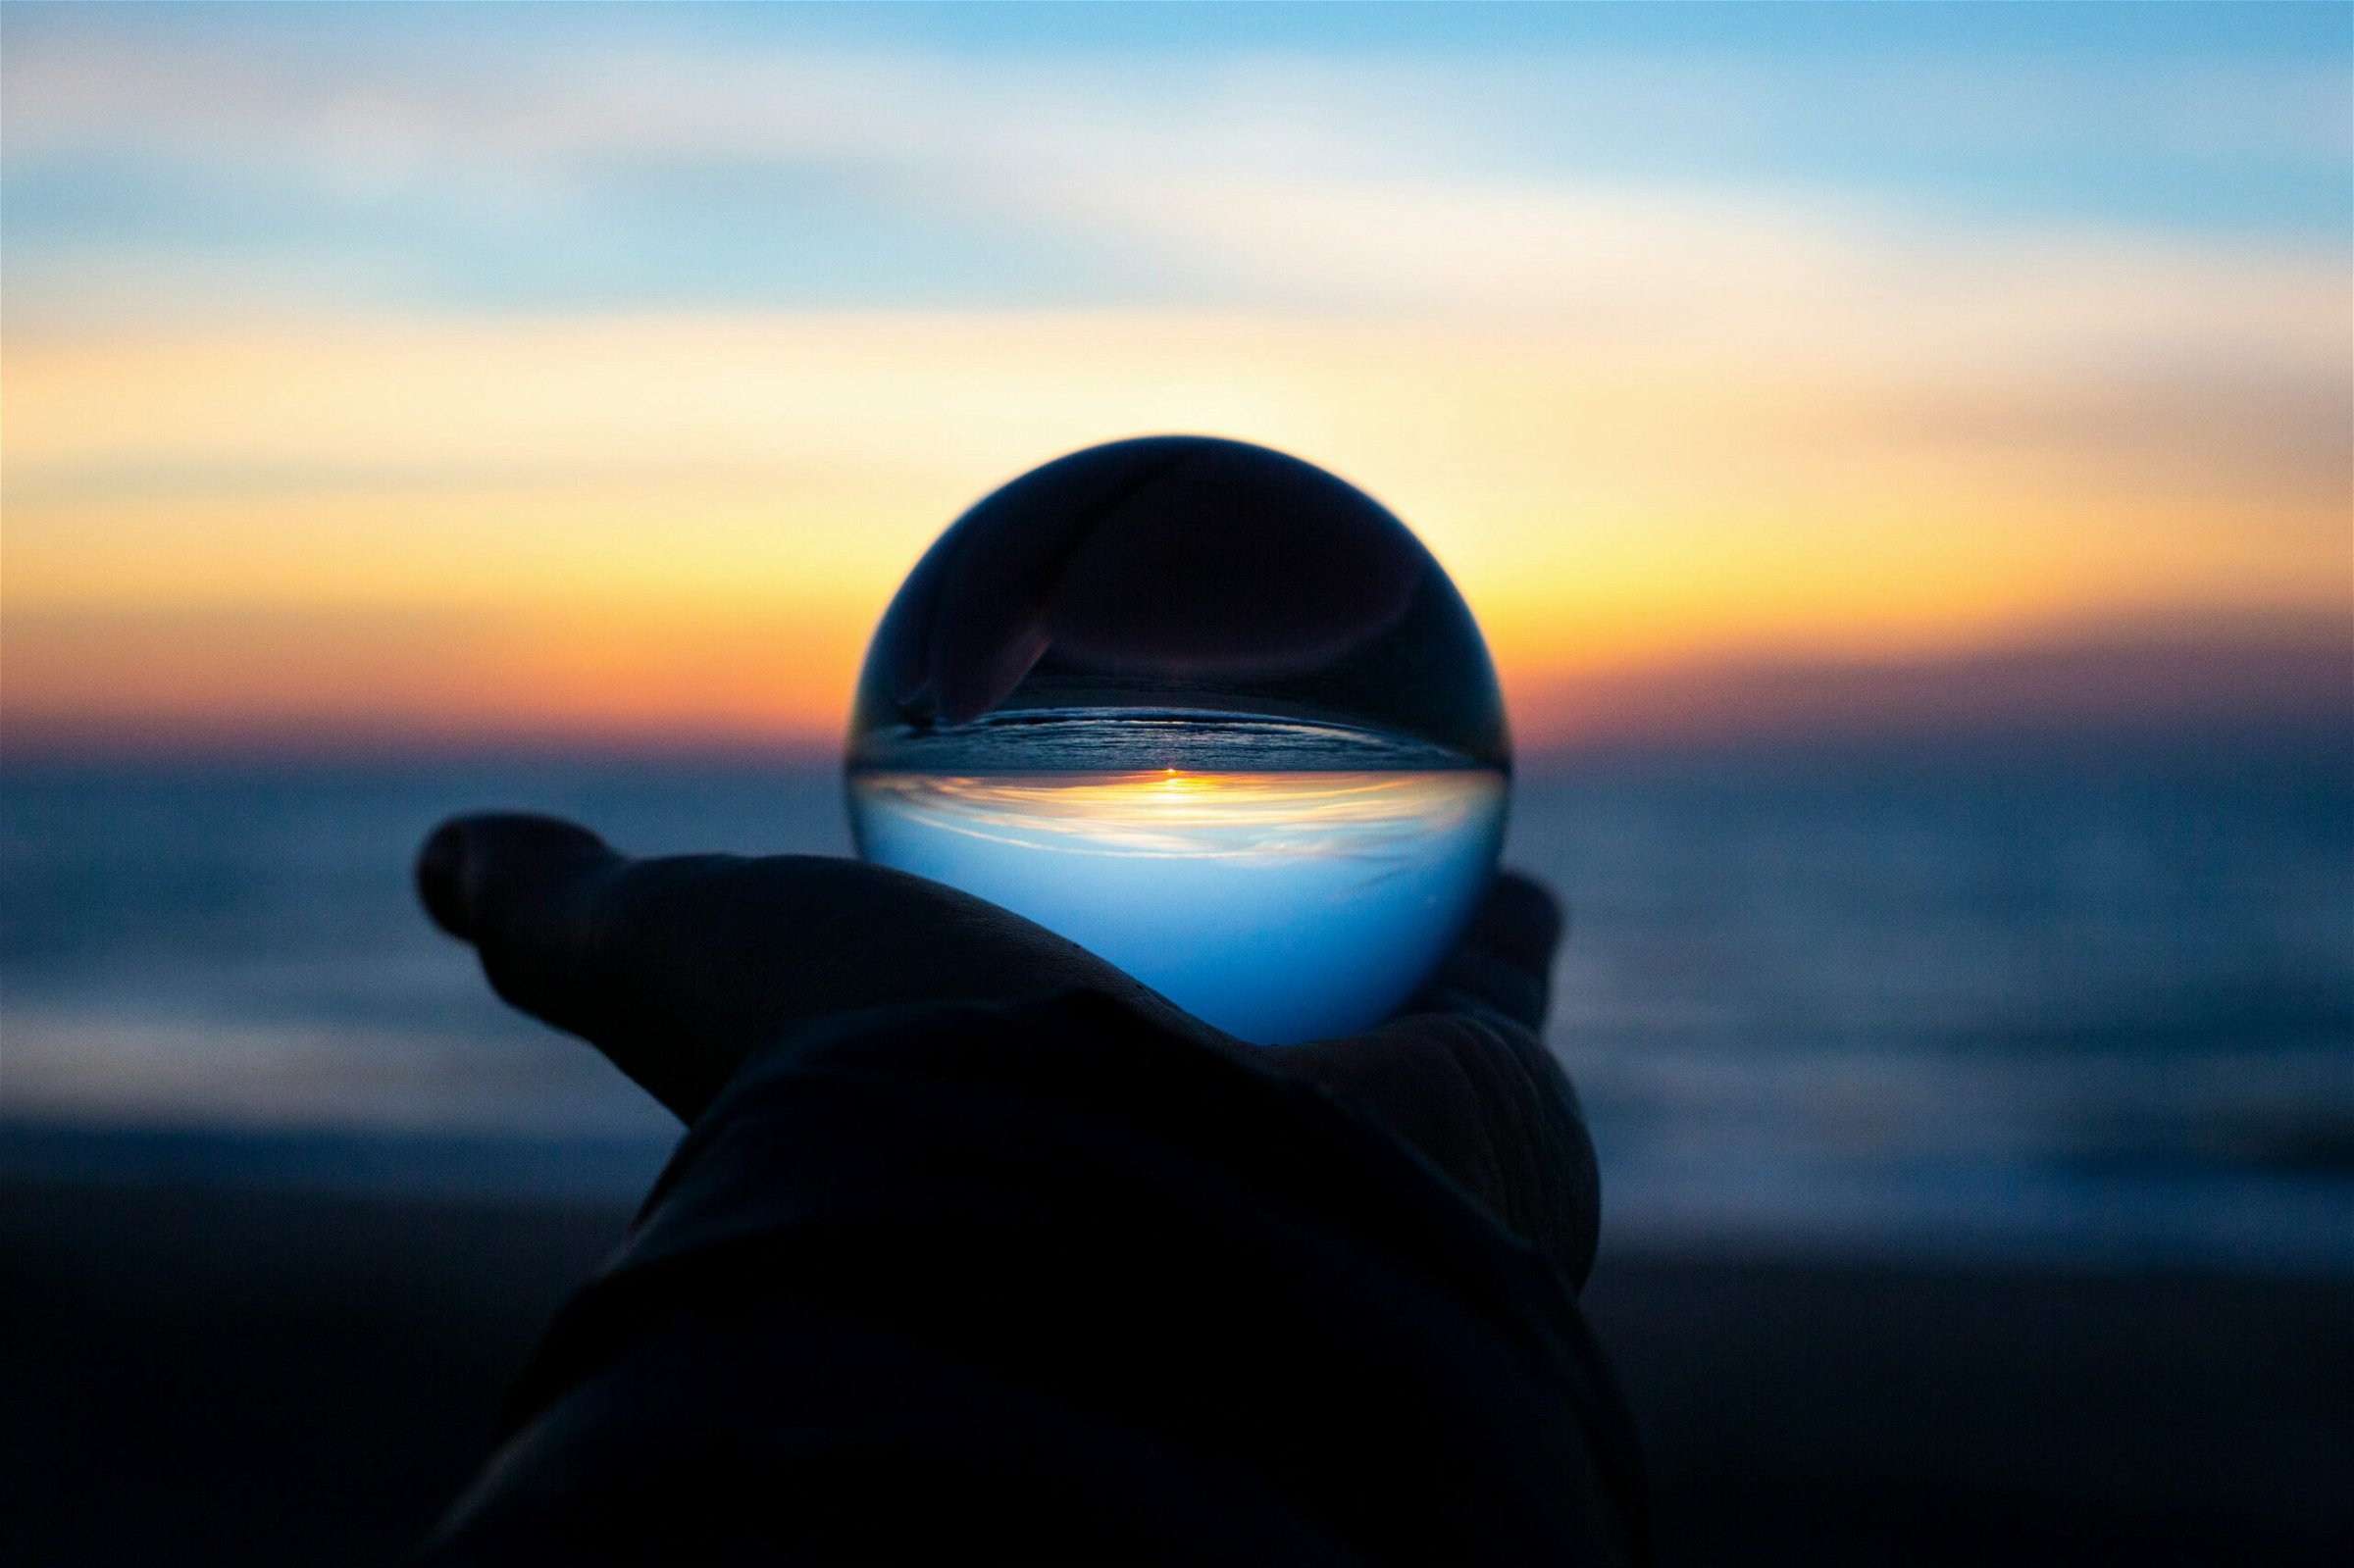 Image of a hand holding a crystal ball - Destination Certification